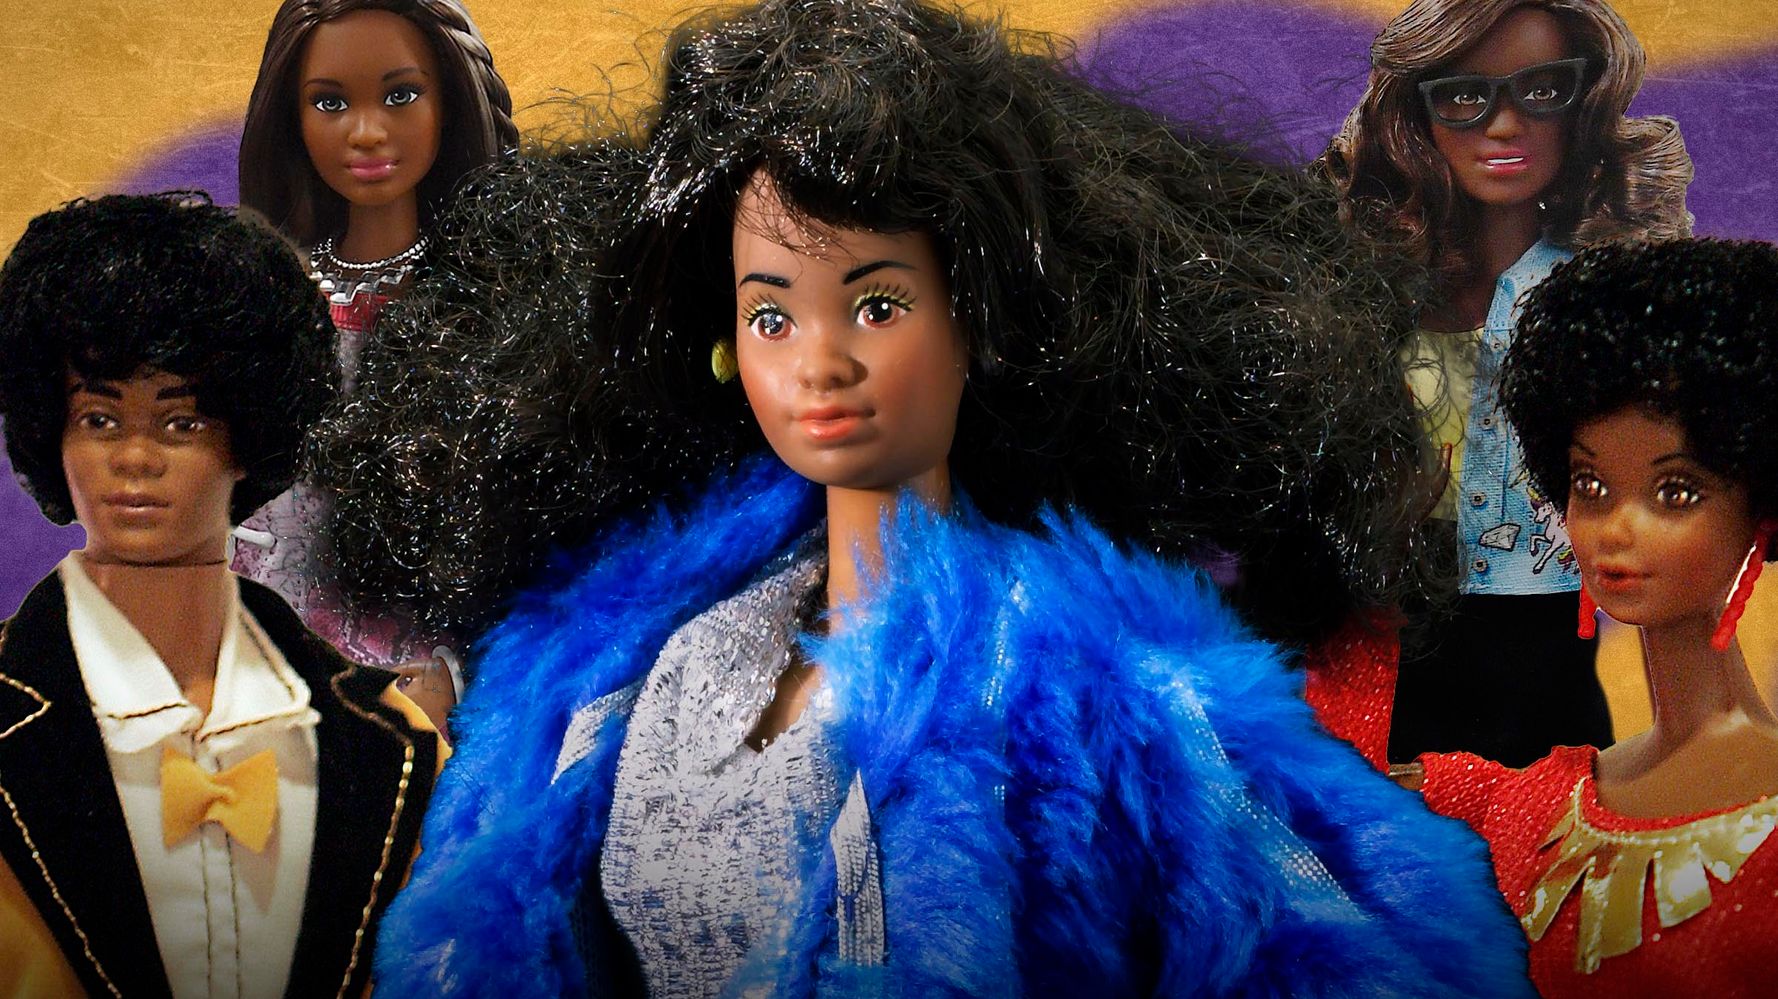 A parent's guide to 'Barbie': What to know before watching it with the kids